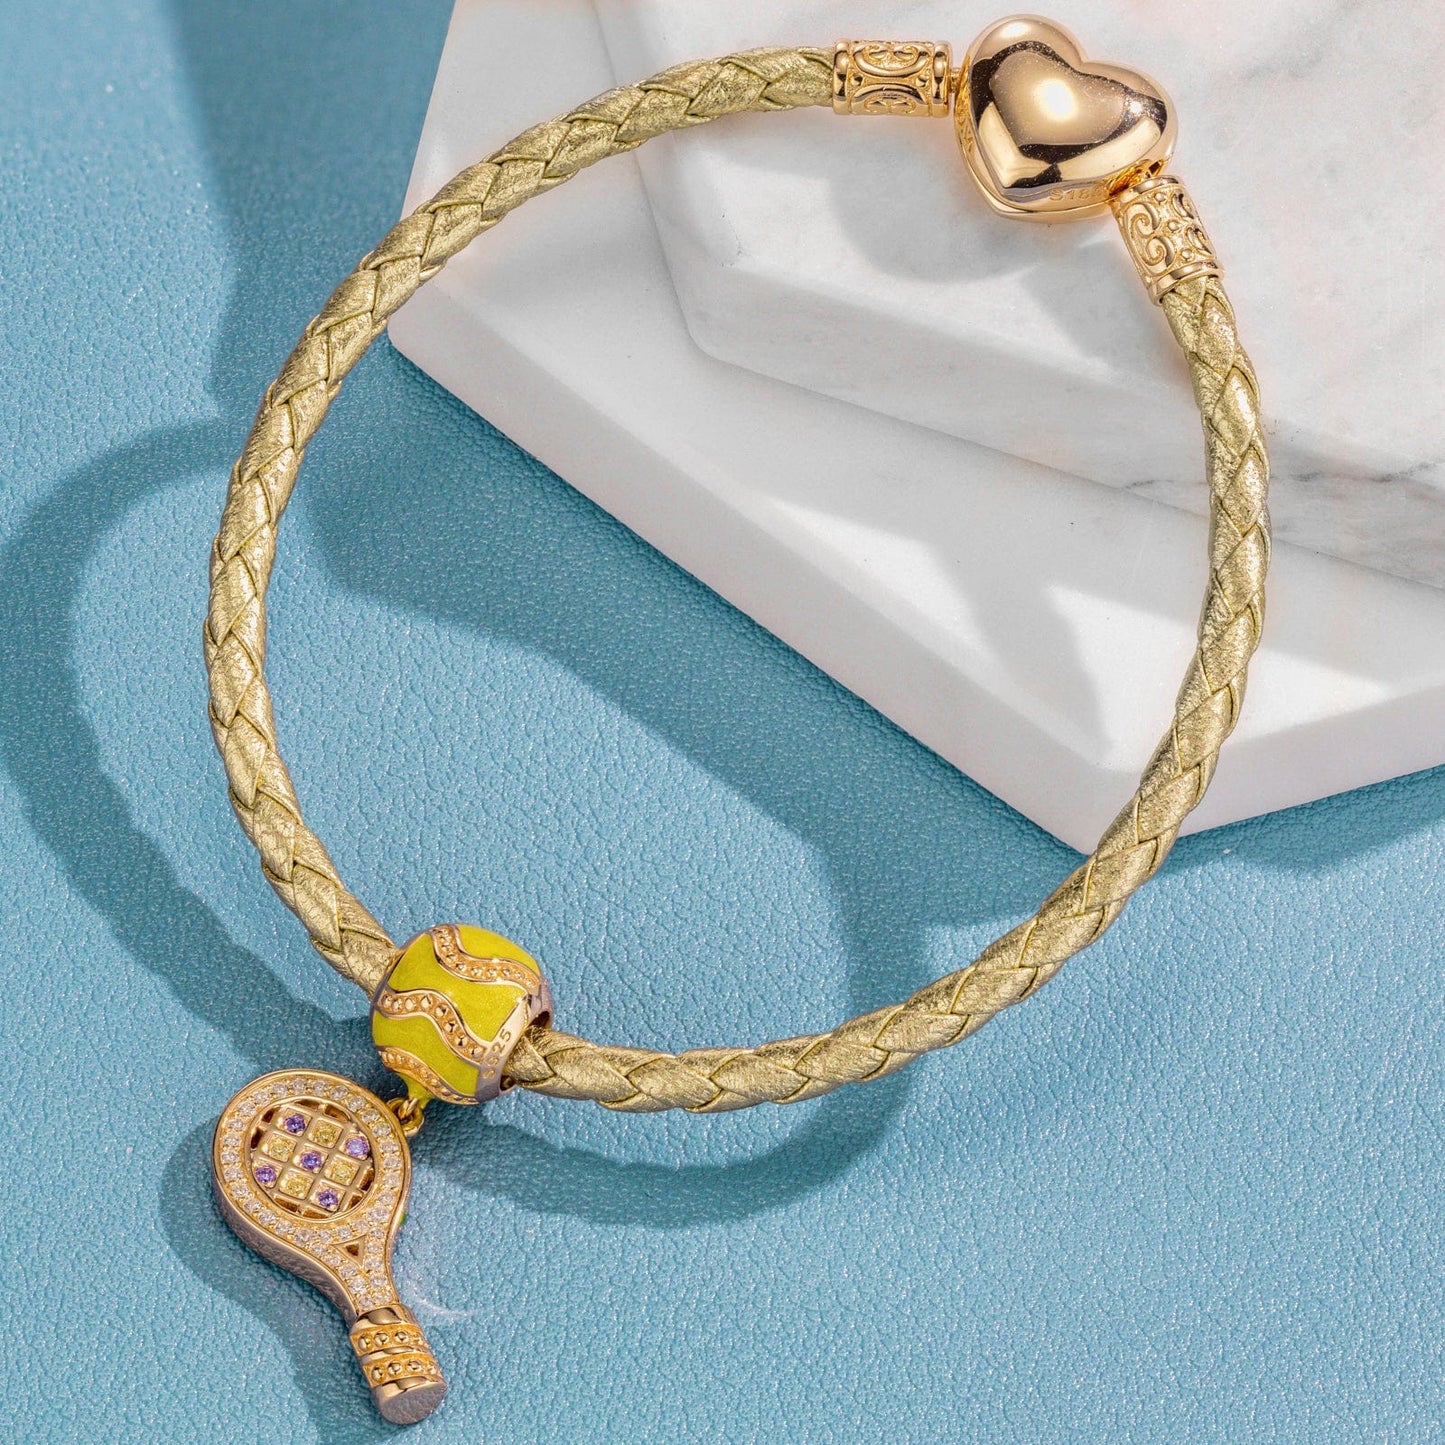 Sterling Silver Allure of Tennis Charms Bracelet Set With Enamel In 14K Gold Plated